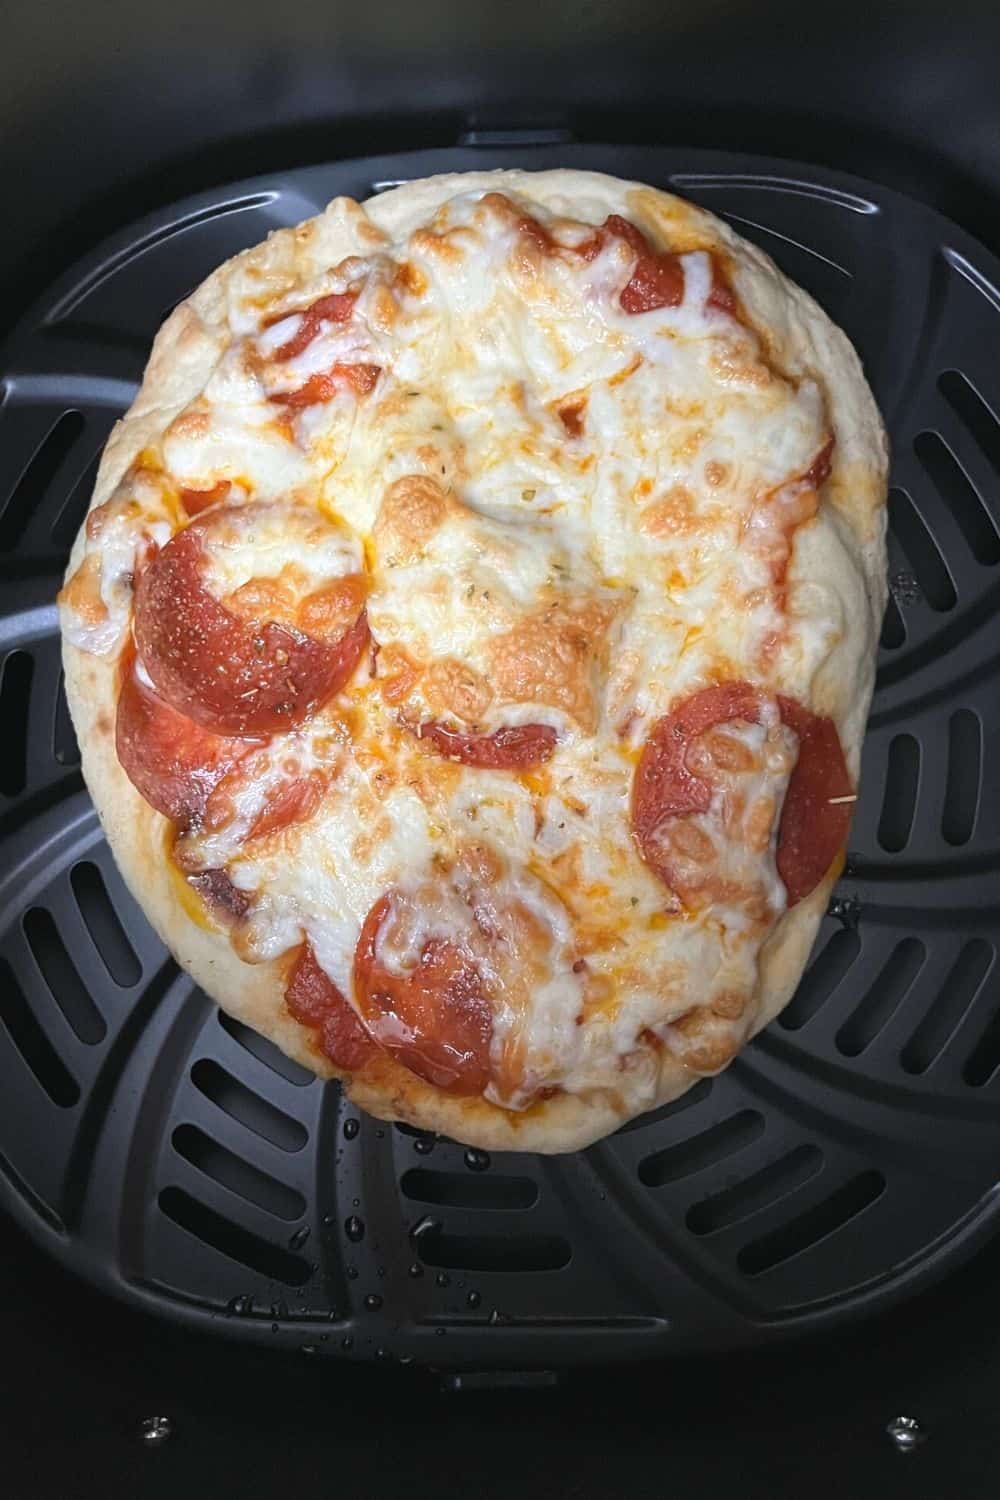 freshly baked naan pizza in the basket of an air fryer, with golden melted cheese